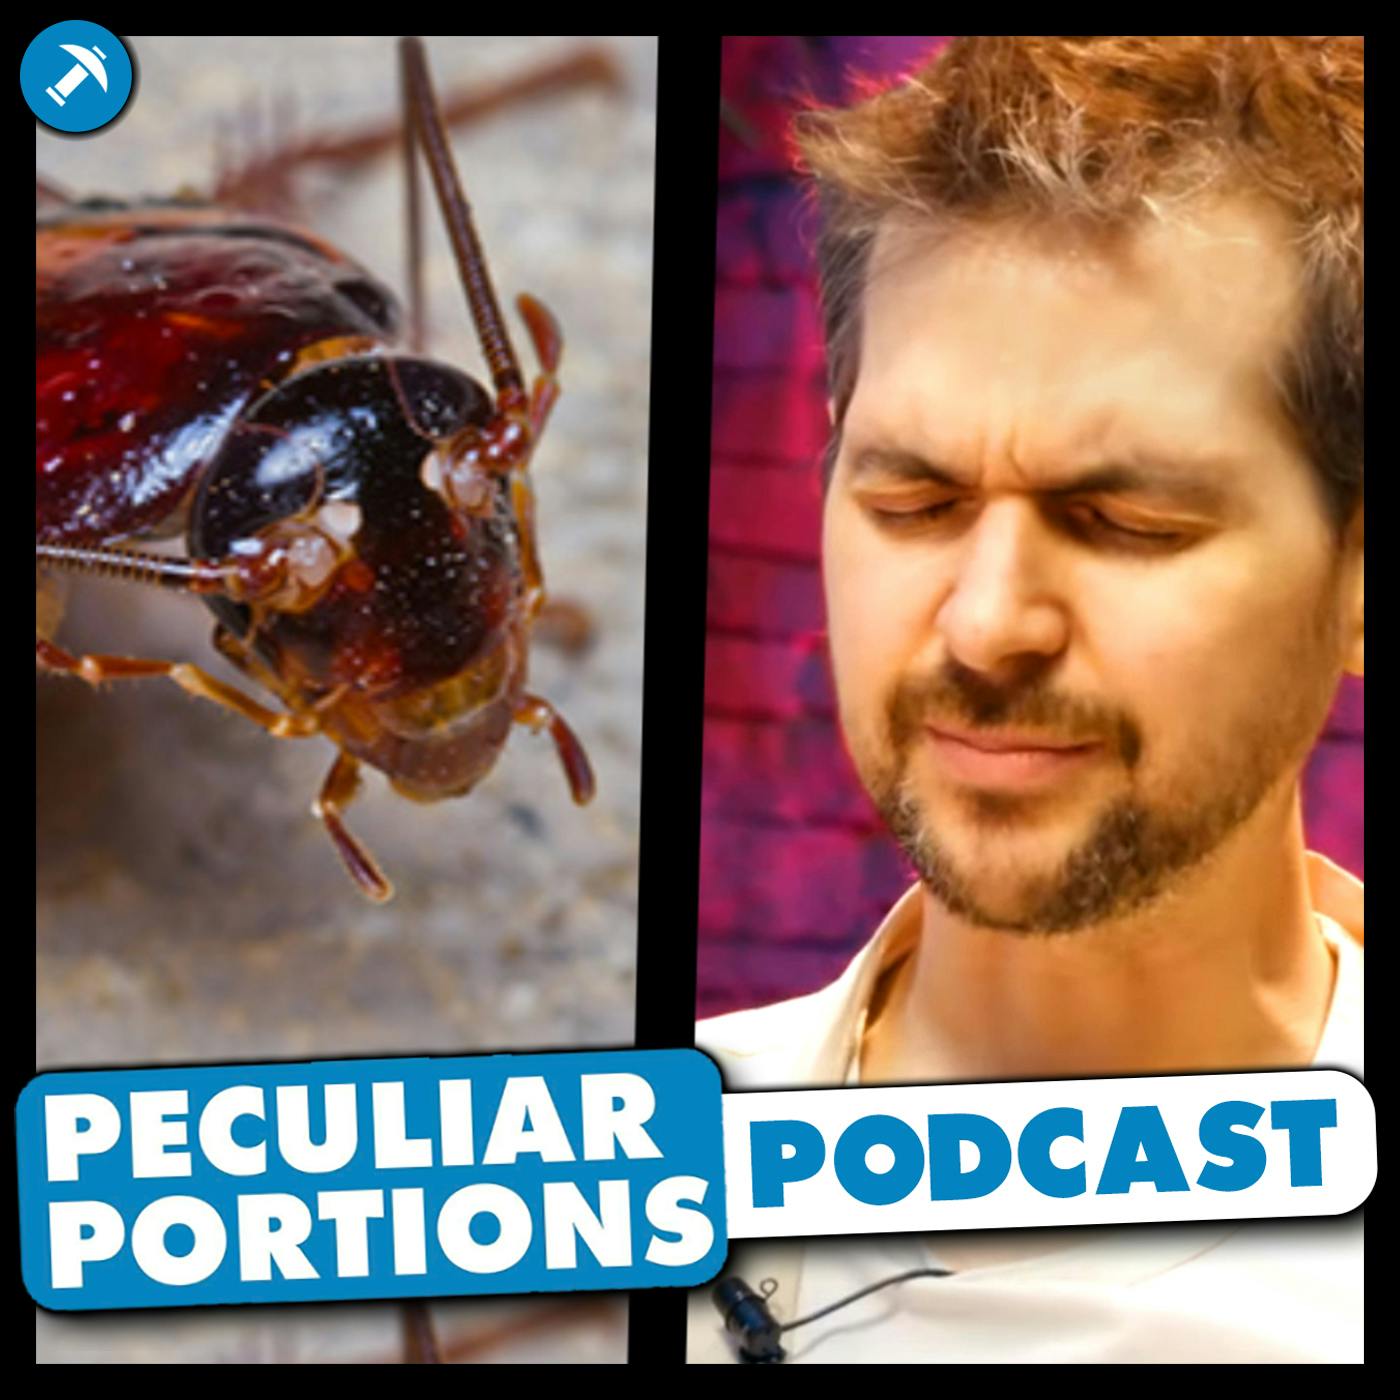 Company pays $2,000 to release 100 cockroaches into your home - Peculiar Portions Podcast #60